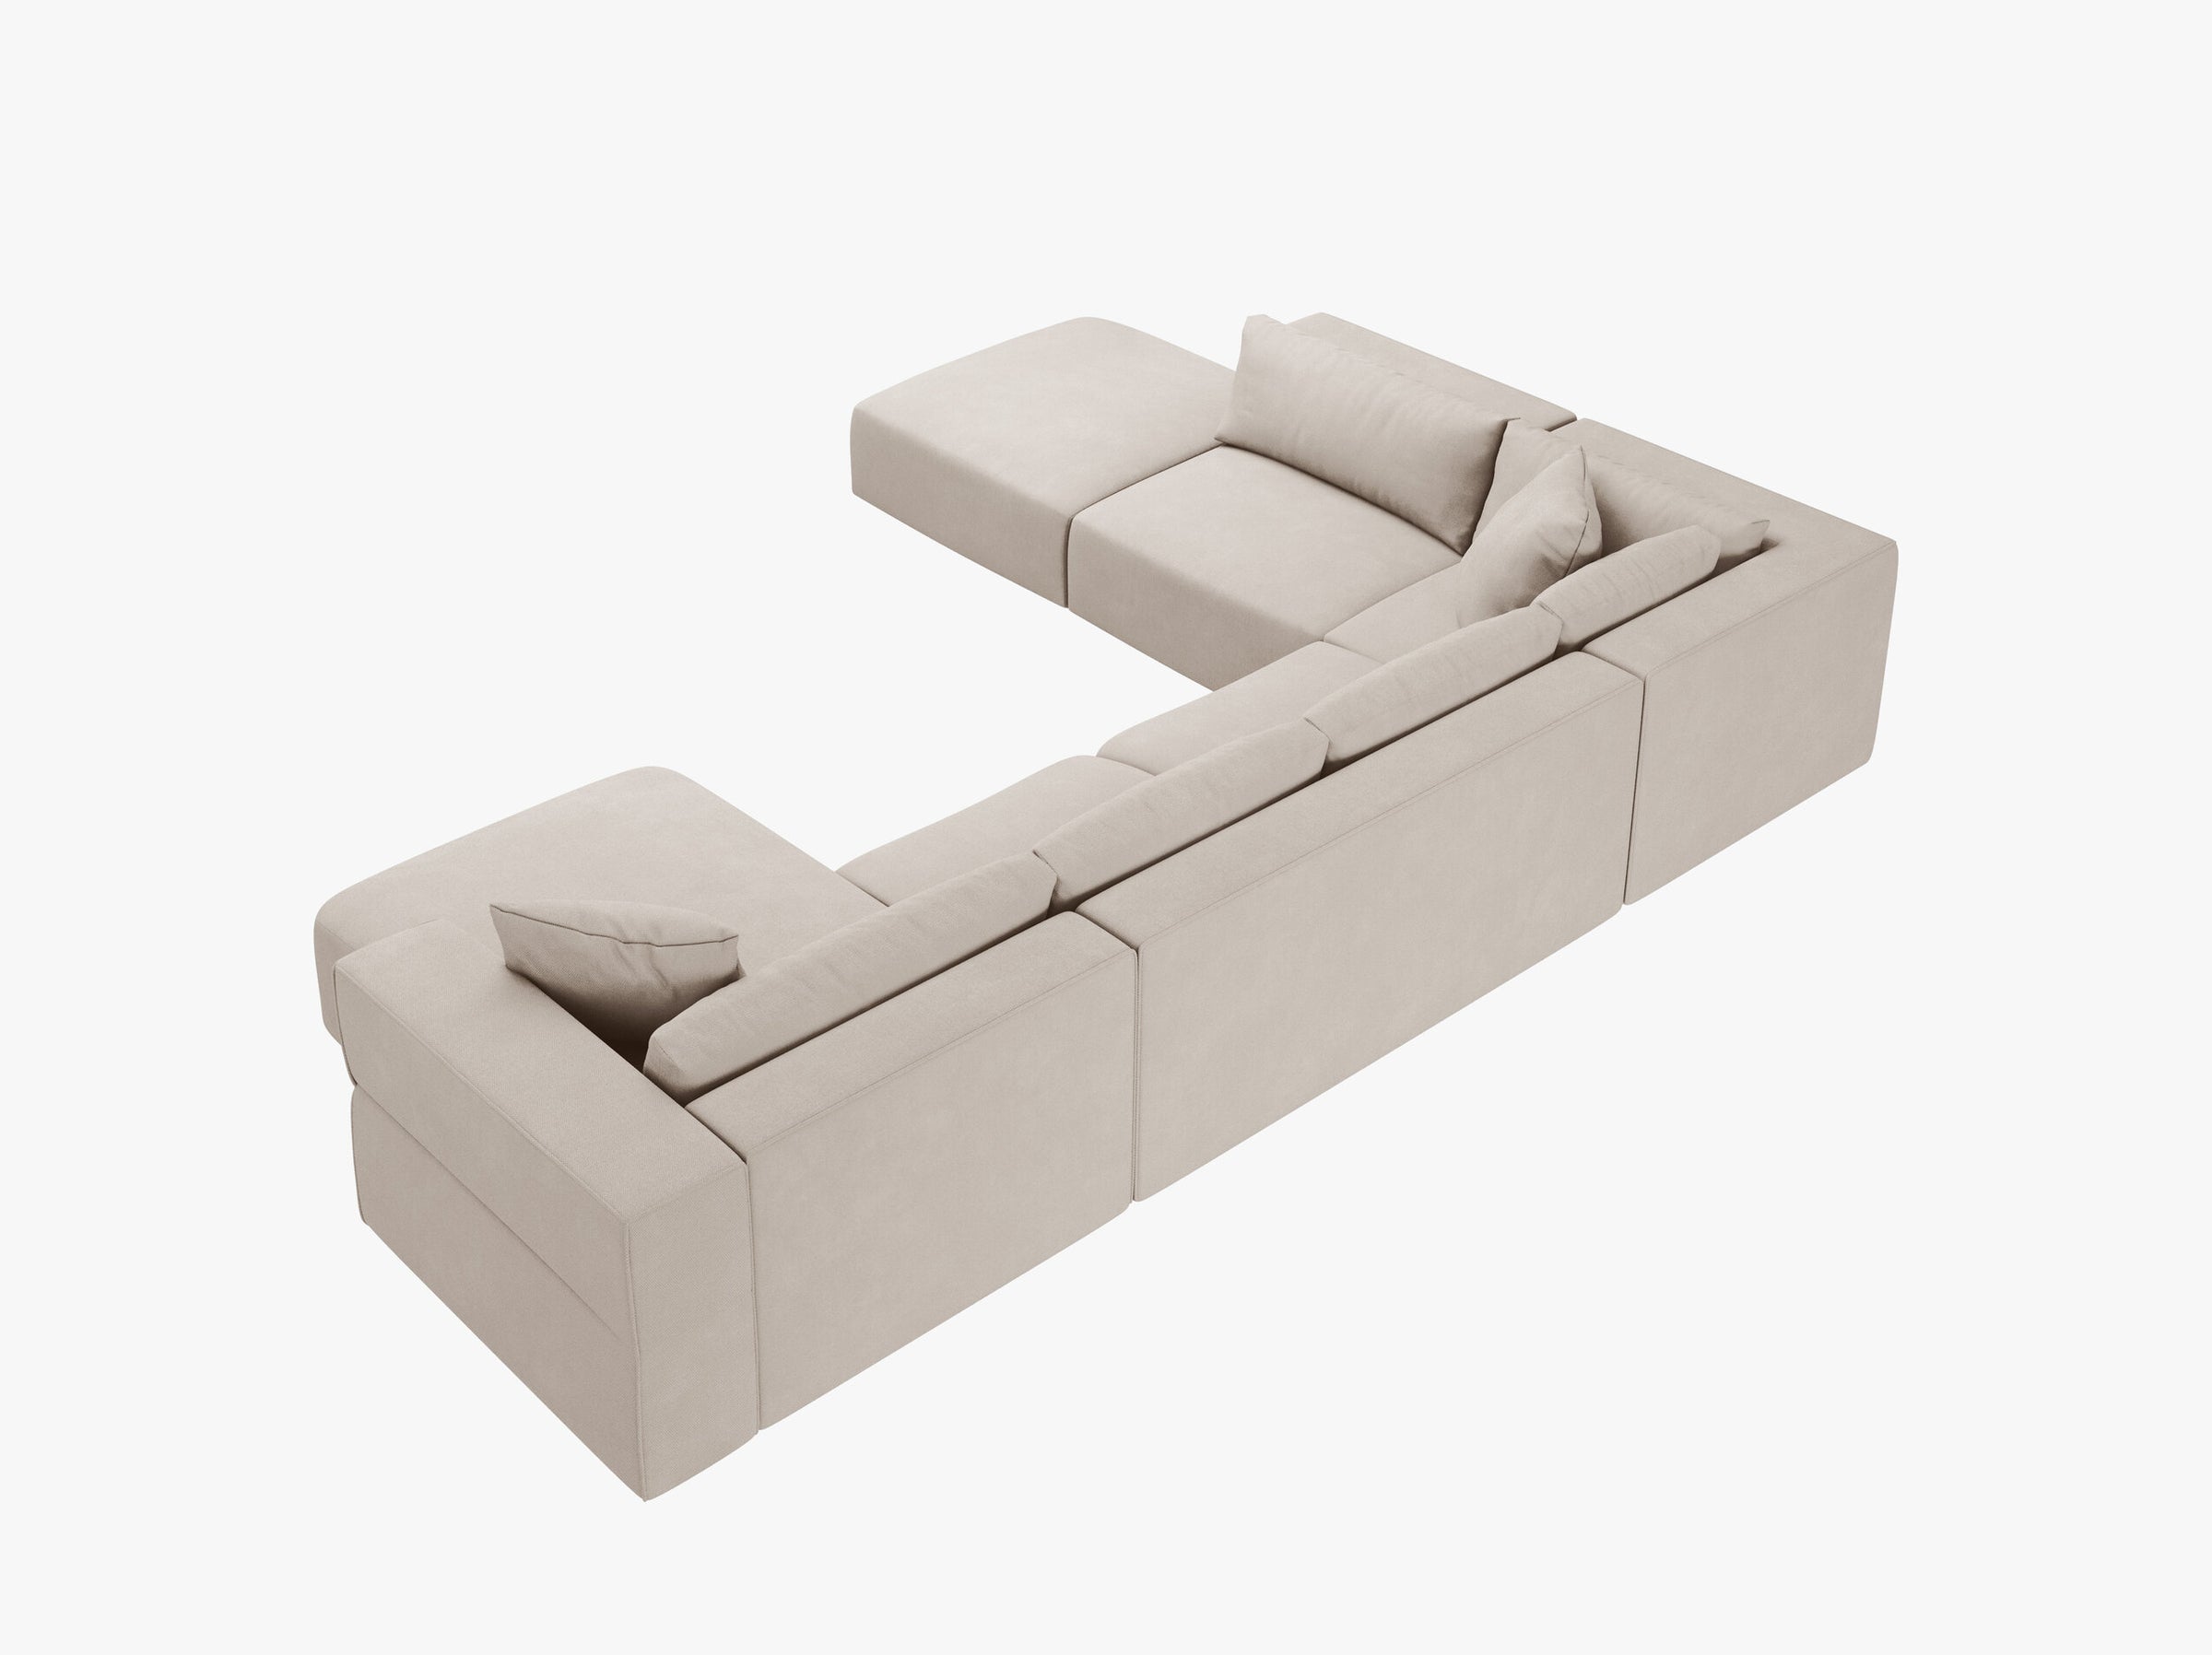 Tyra sofas structured fabric beige